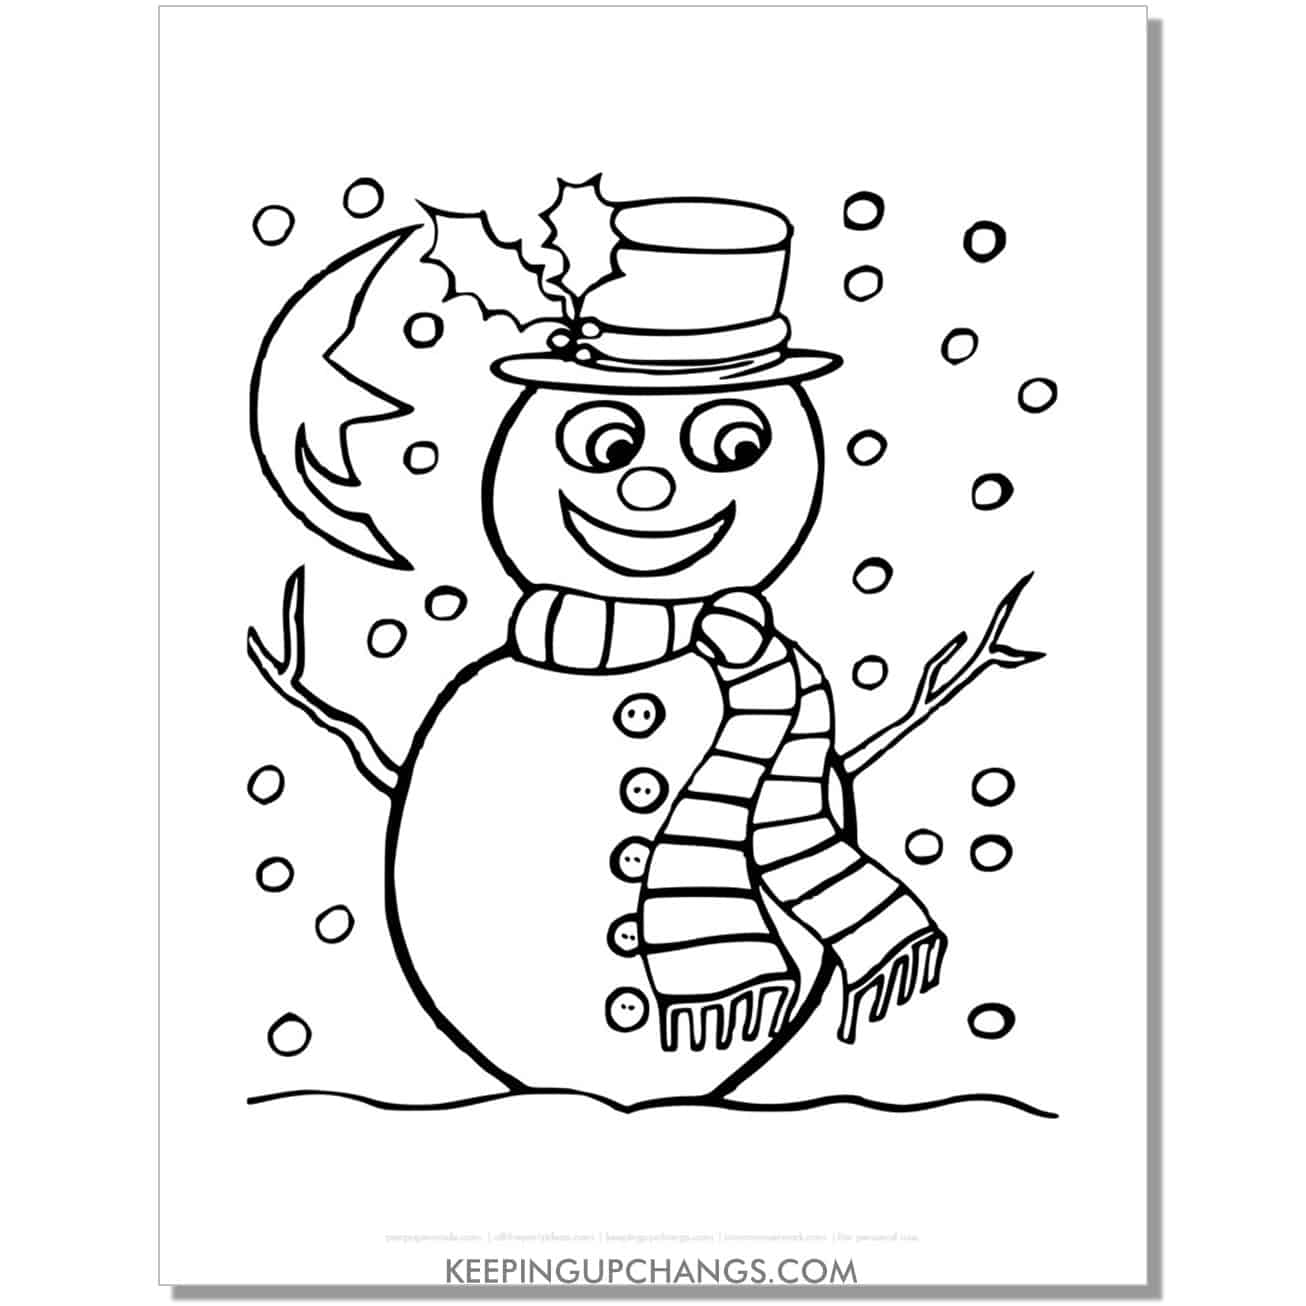 free vintage snowman with holly, hat, scarf coloring page.